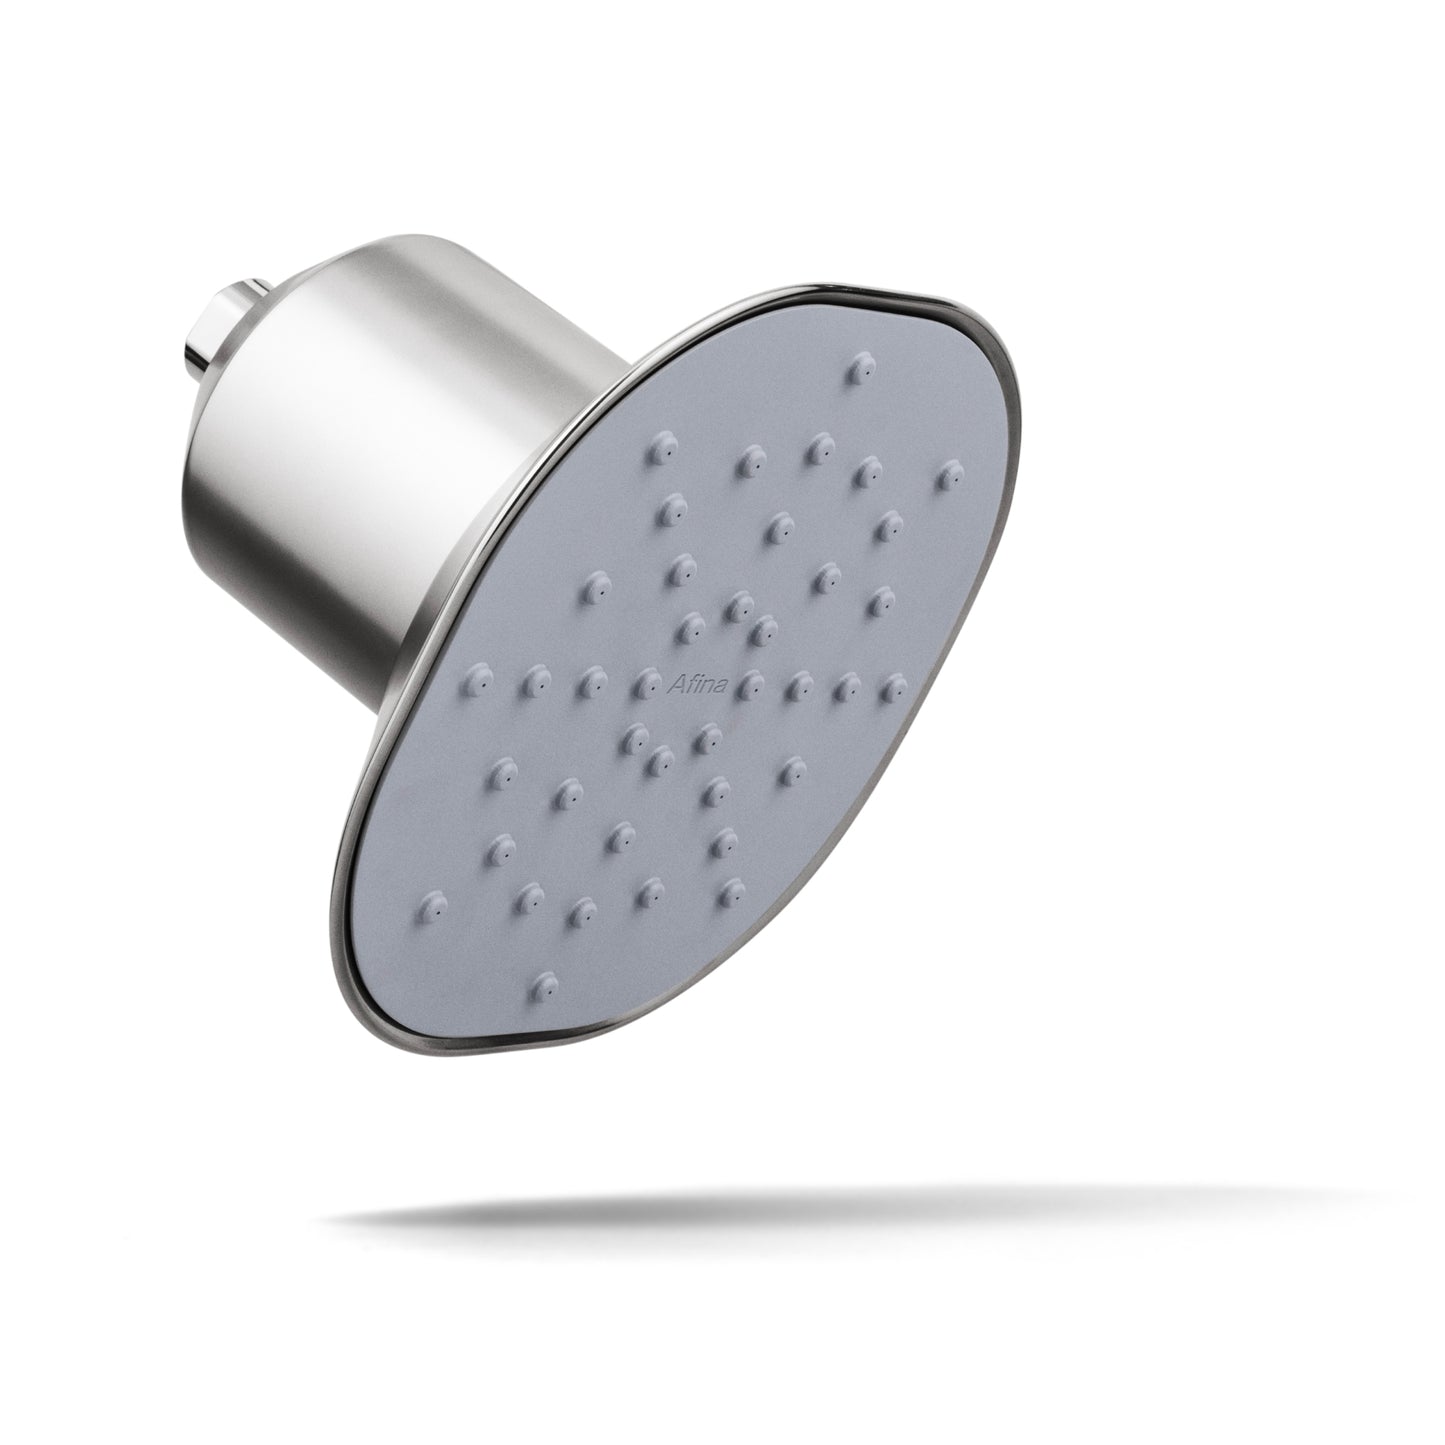 A-01 Filtered  Shower Head